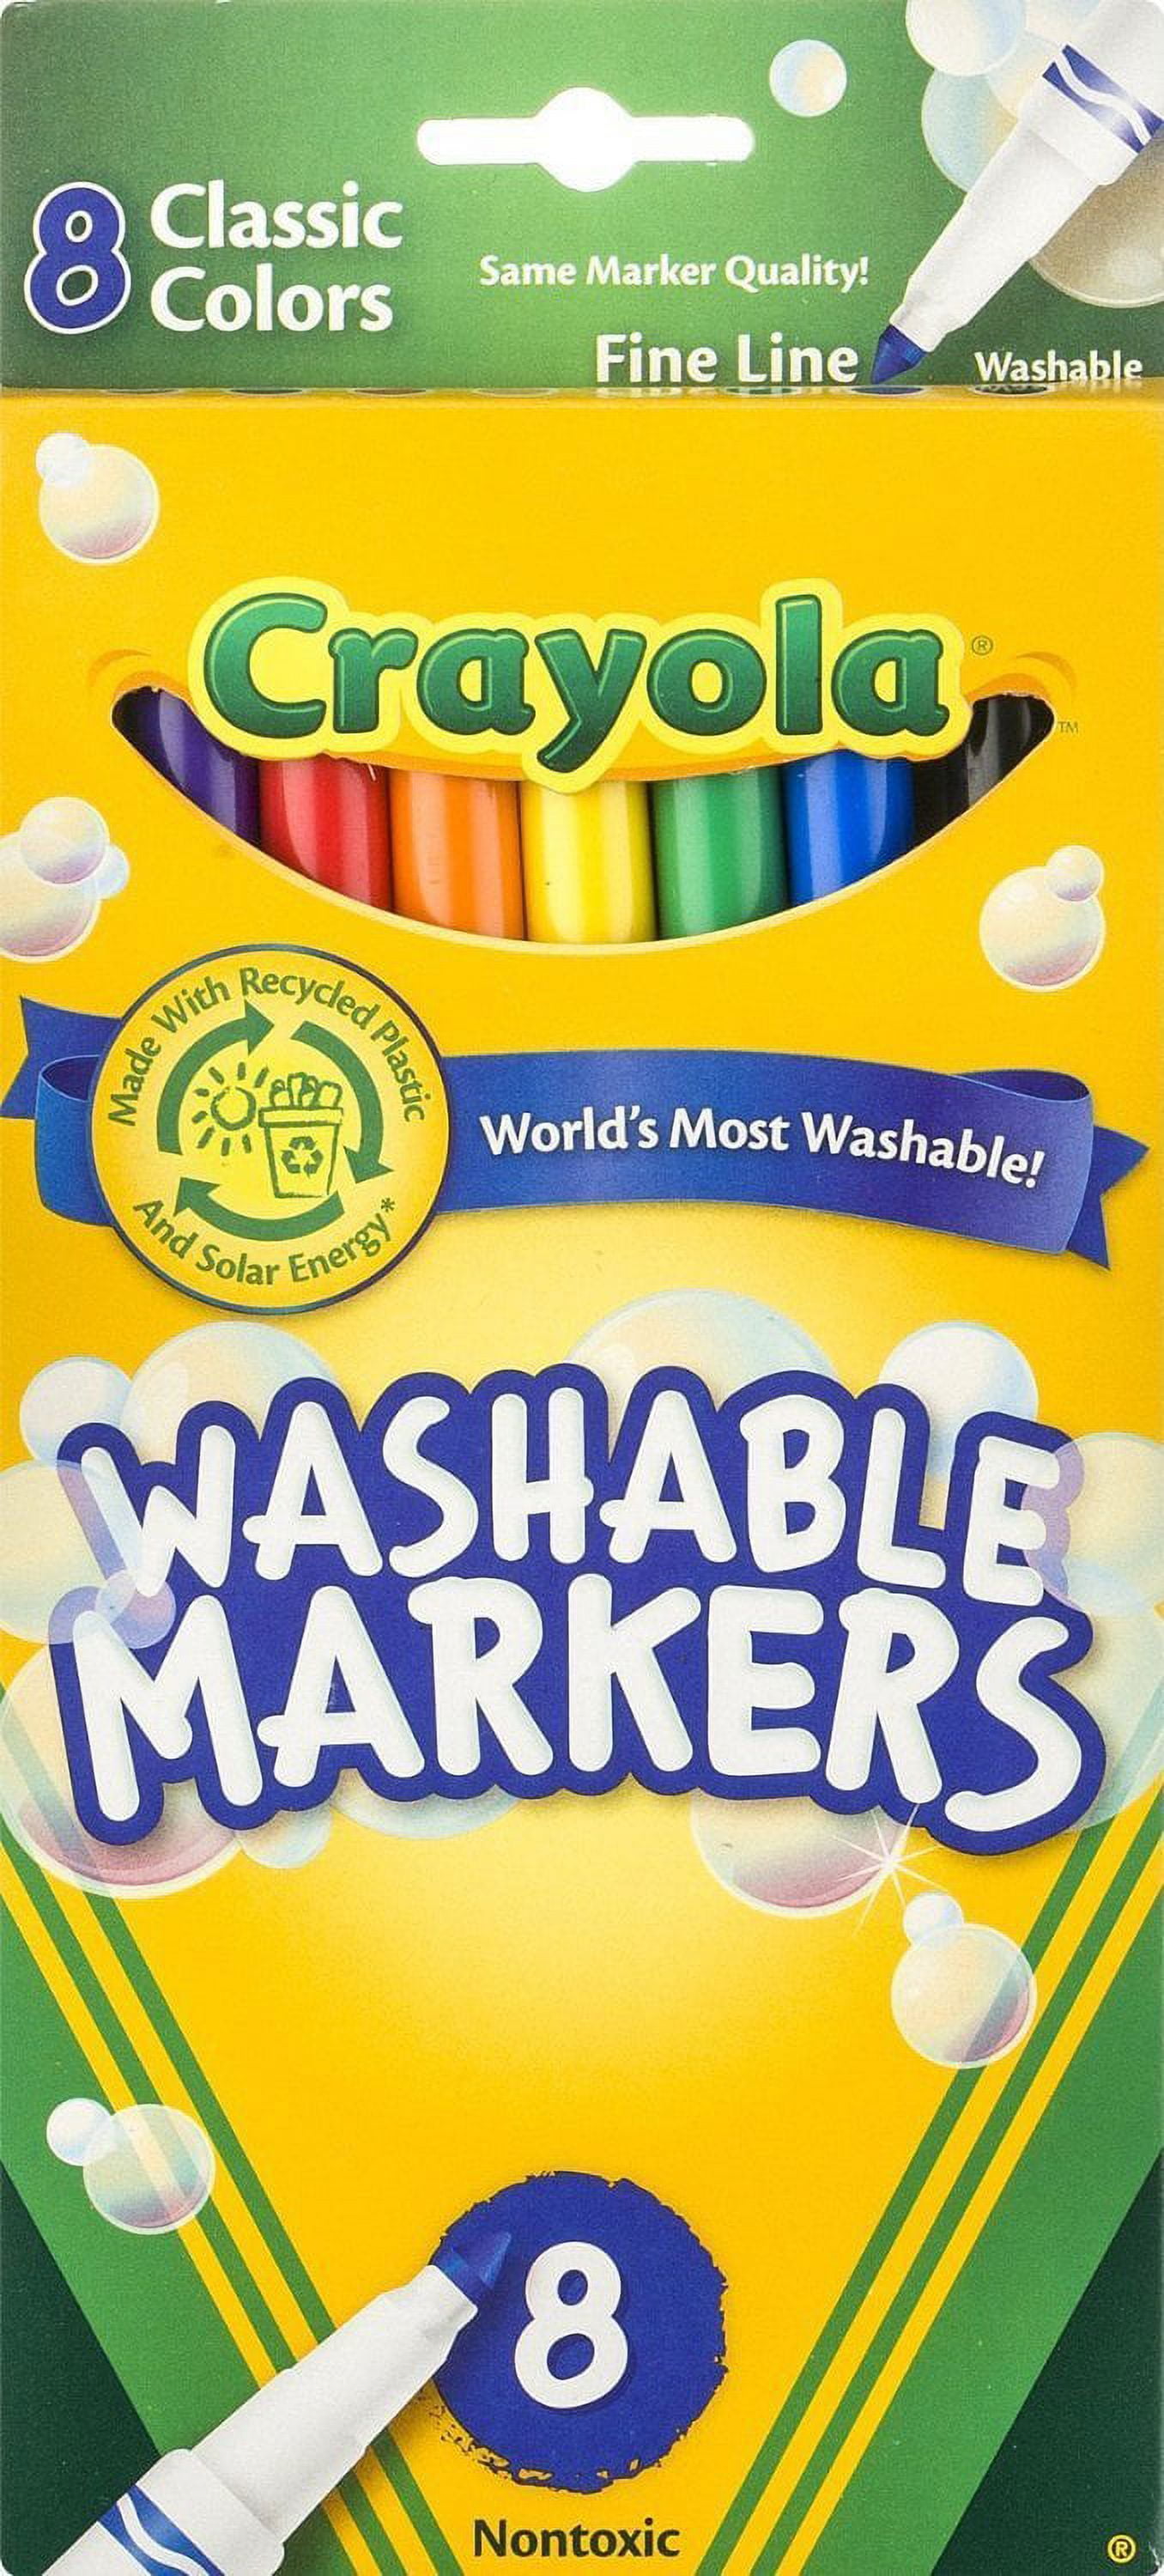 Crayola myFirst Washable Markers - Assorted Colours (Pack of 8) | Easy-Grip Markers Ideal for Toddlers Hands | Ideal for Kids Aged 12+ Months